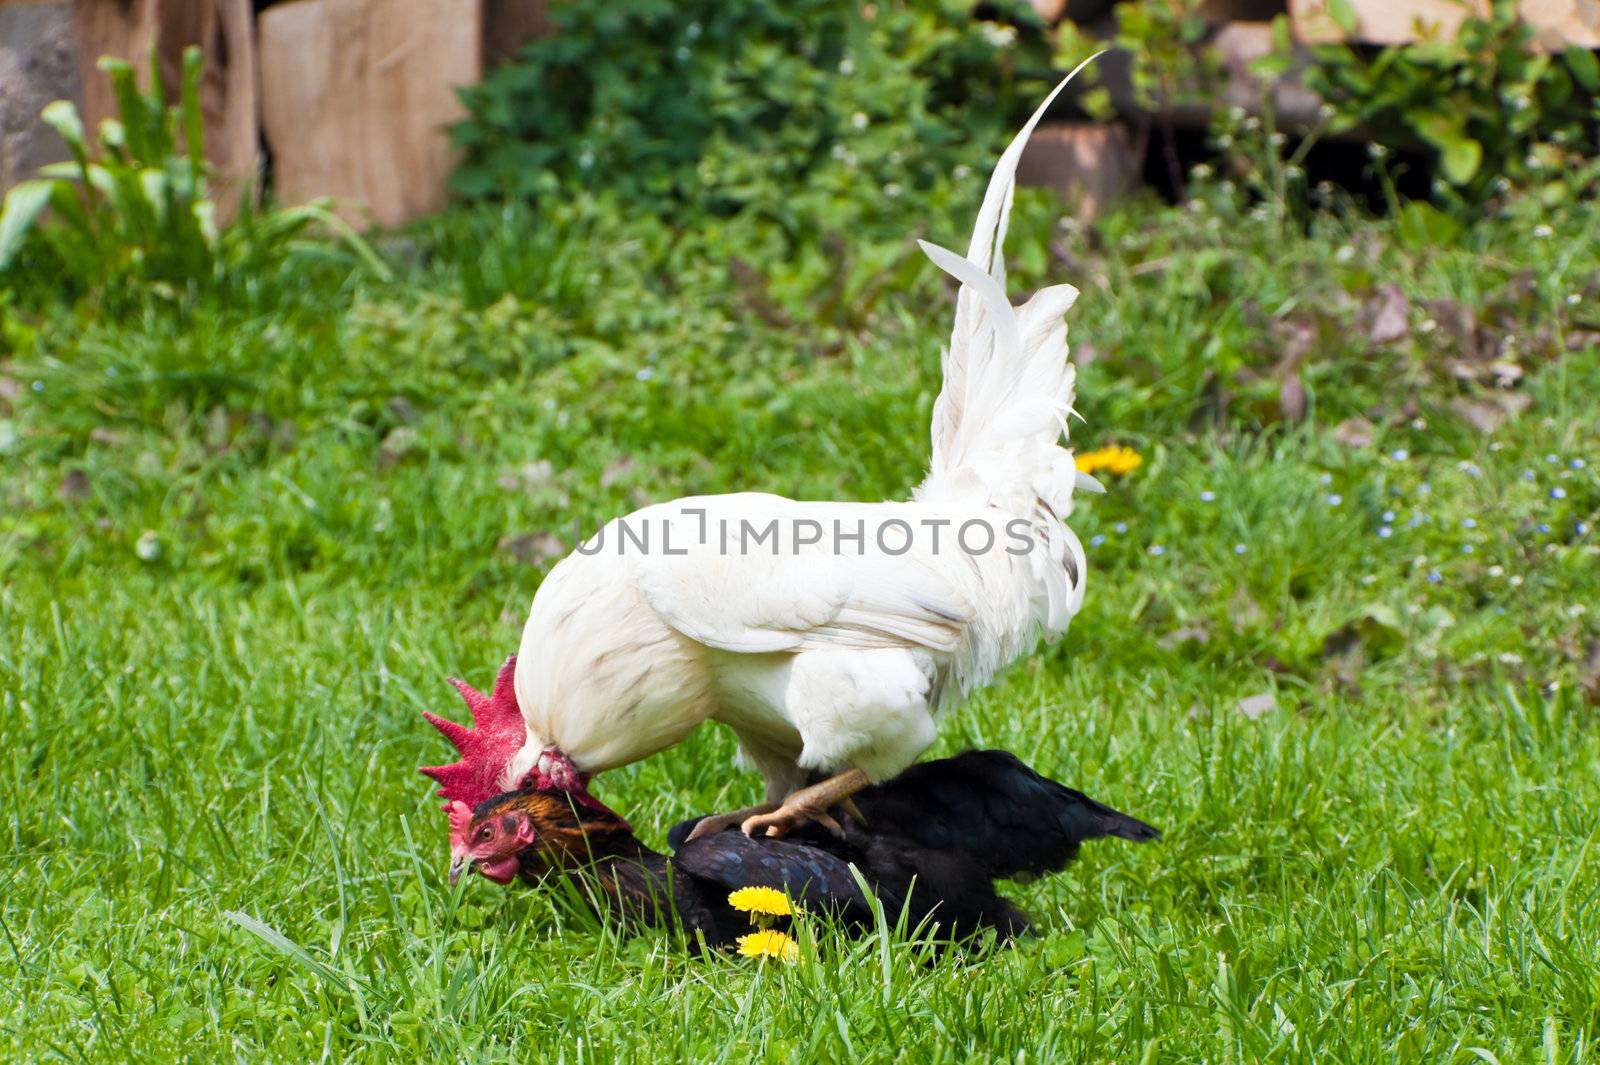 This image shows a cock and chicken in action